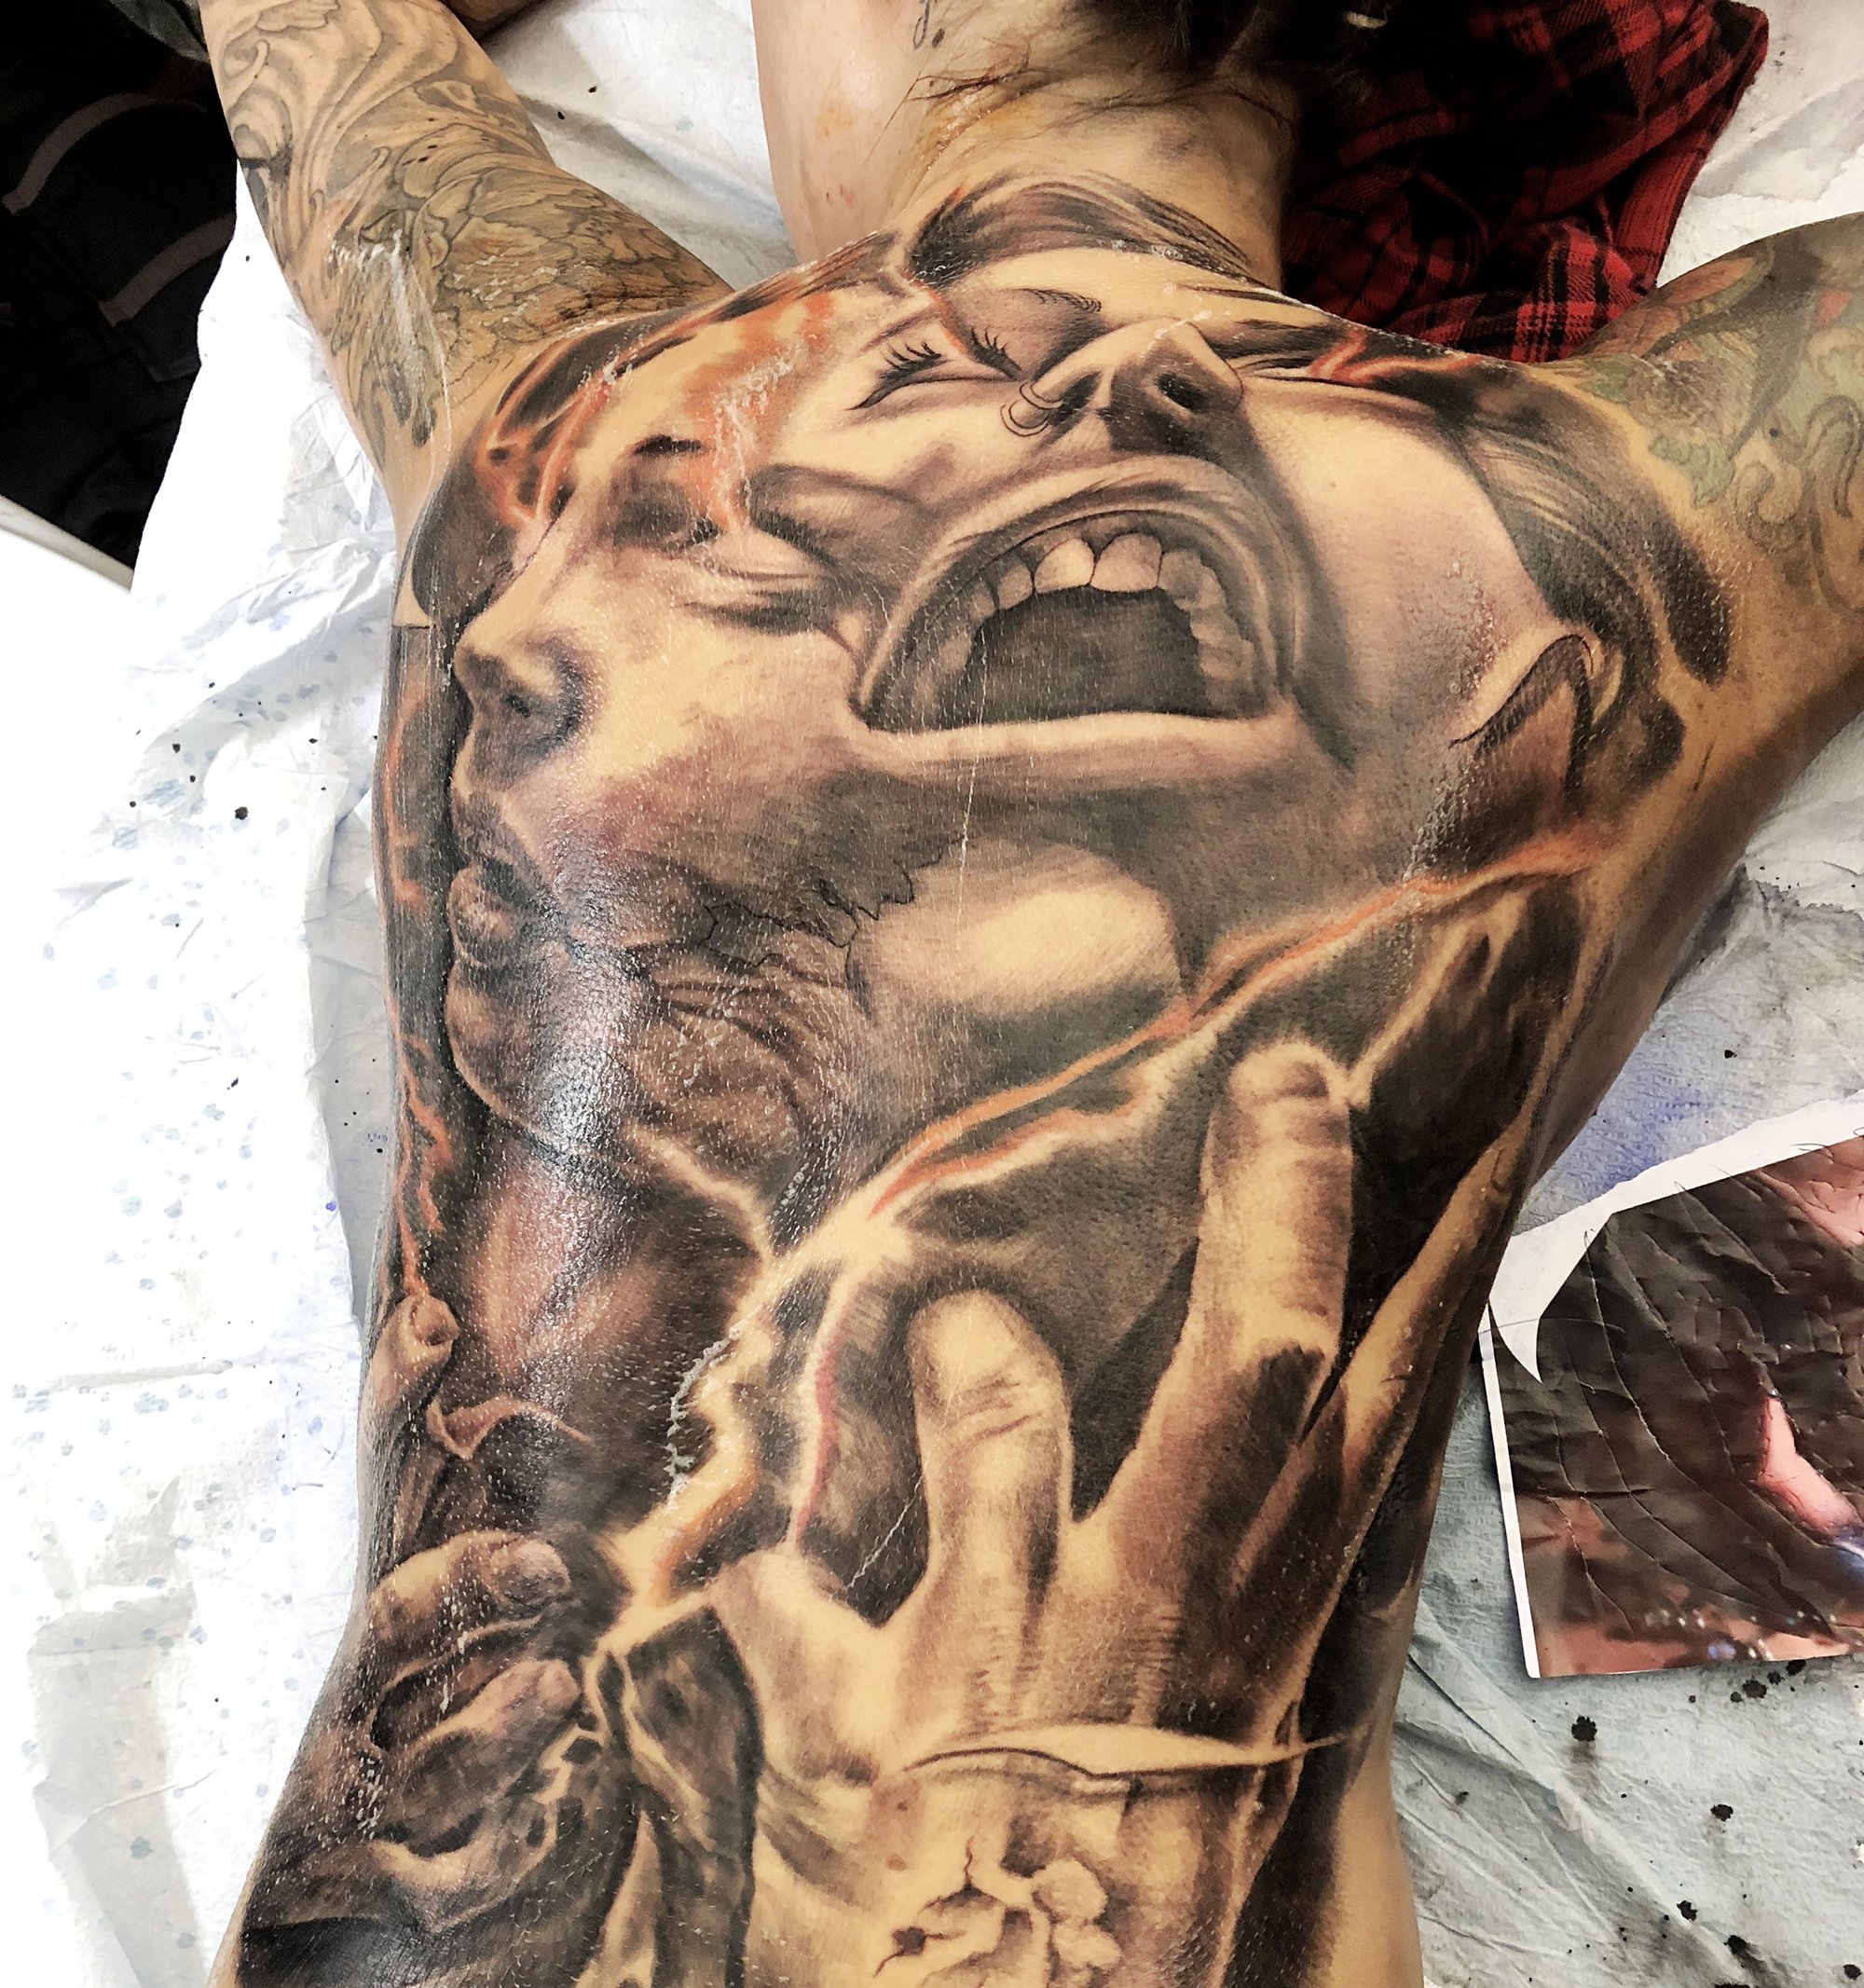 draworking, mxndoza, psicotattoo, tattooing on back, grey and black, canada tattoo convention